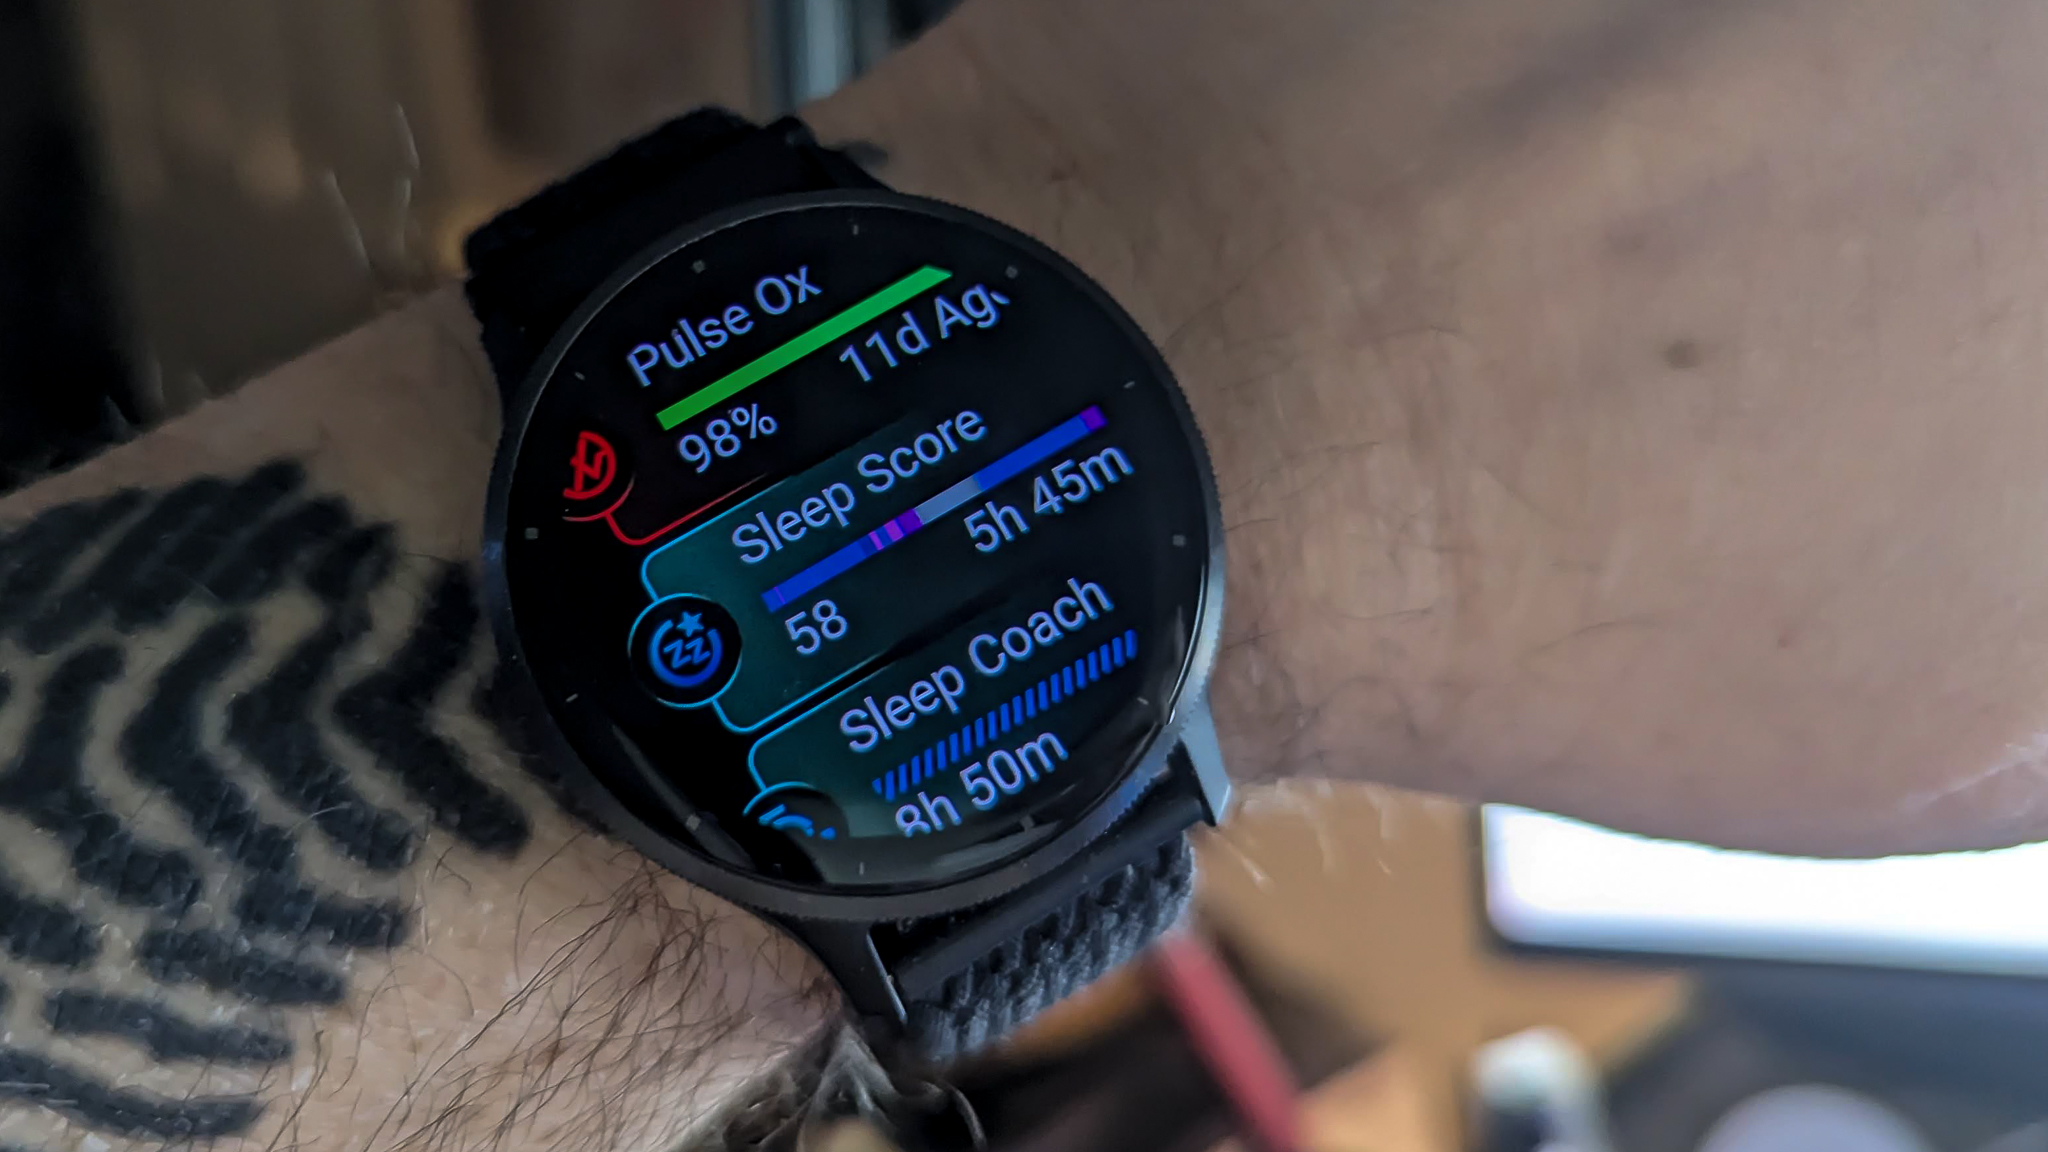 Garmin's Venu 3 Smartwatch Can Track Your Naps and Has 14-Day